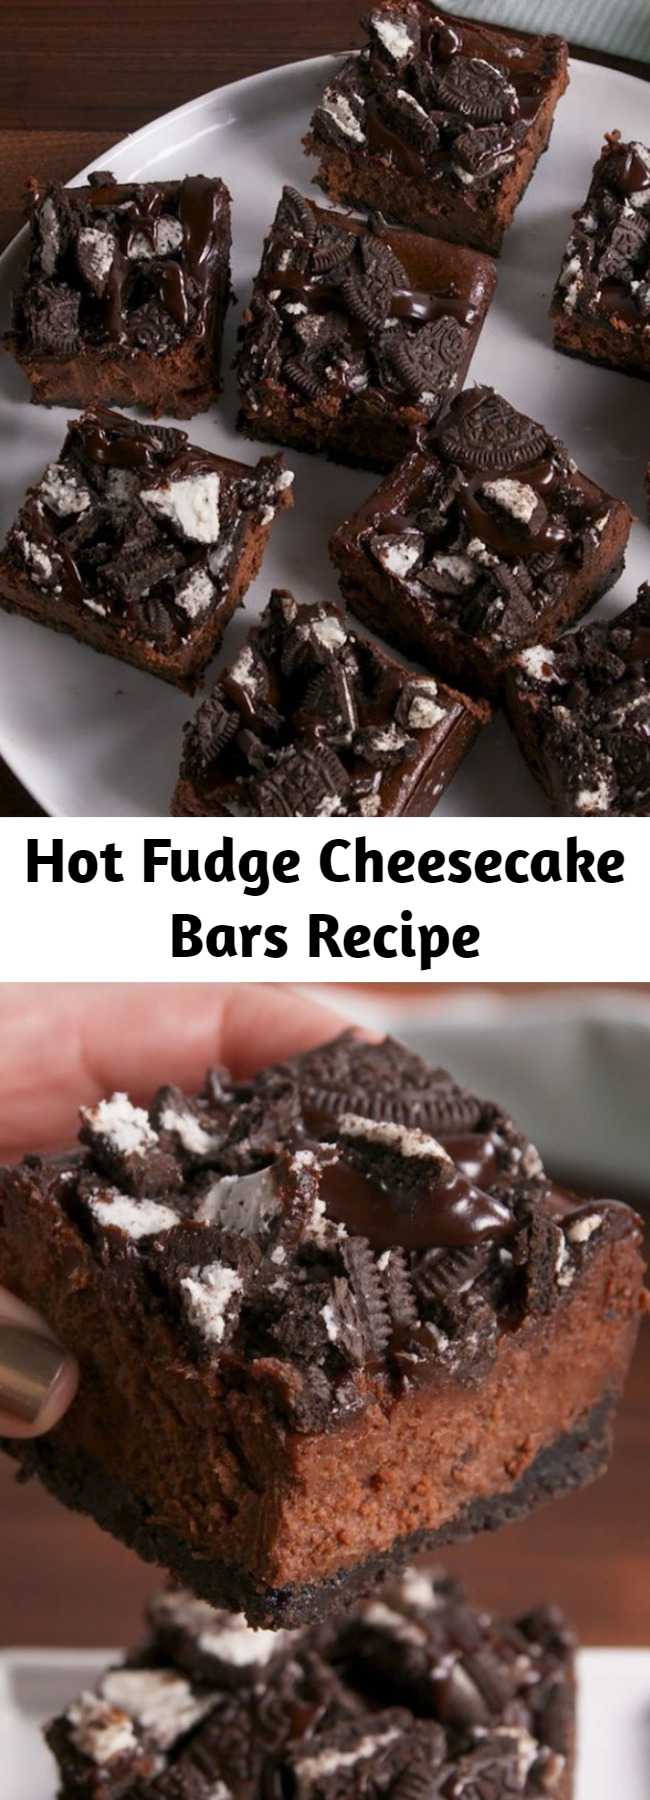 Hot Fudge Cheesecake Bars Recipe - The chocolate lover's dream. This will fulfill all your chocolate fantasies. #food #easyrecipe #dessert #ideas #chocolate